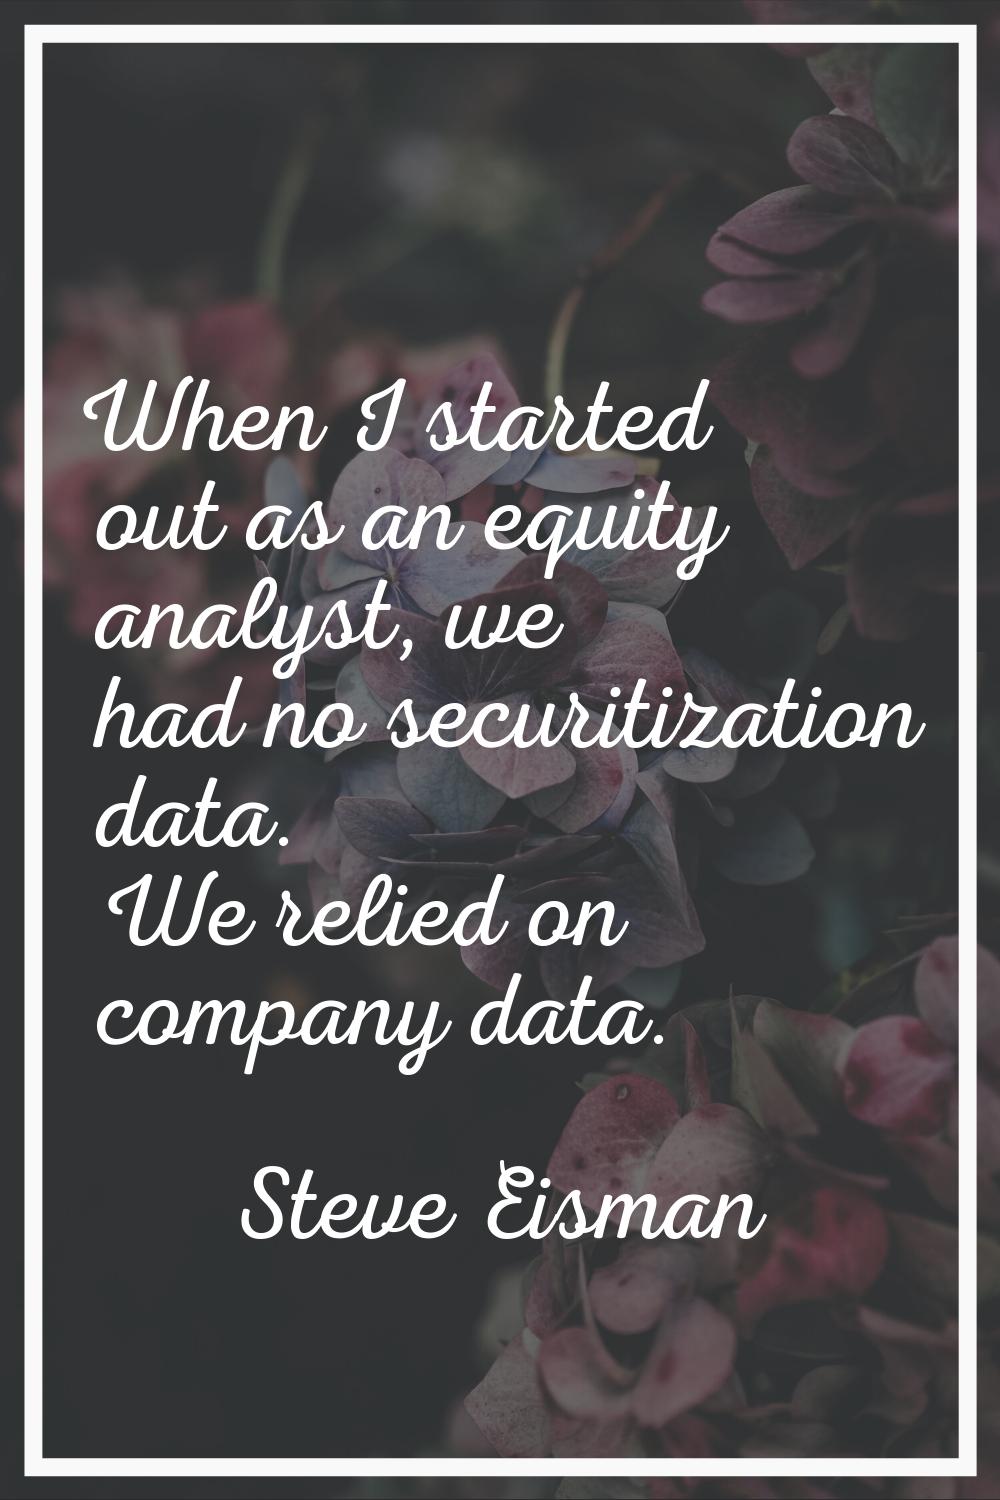 When I started out as an equity analyst, we had no securitization data. We relied on company data.